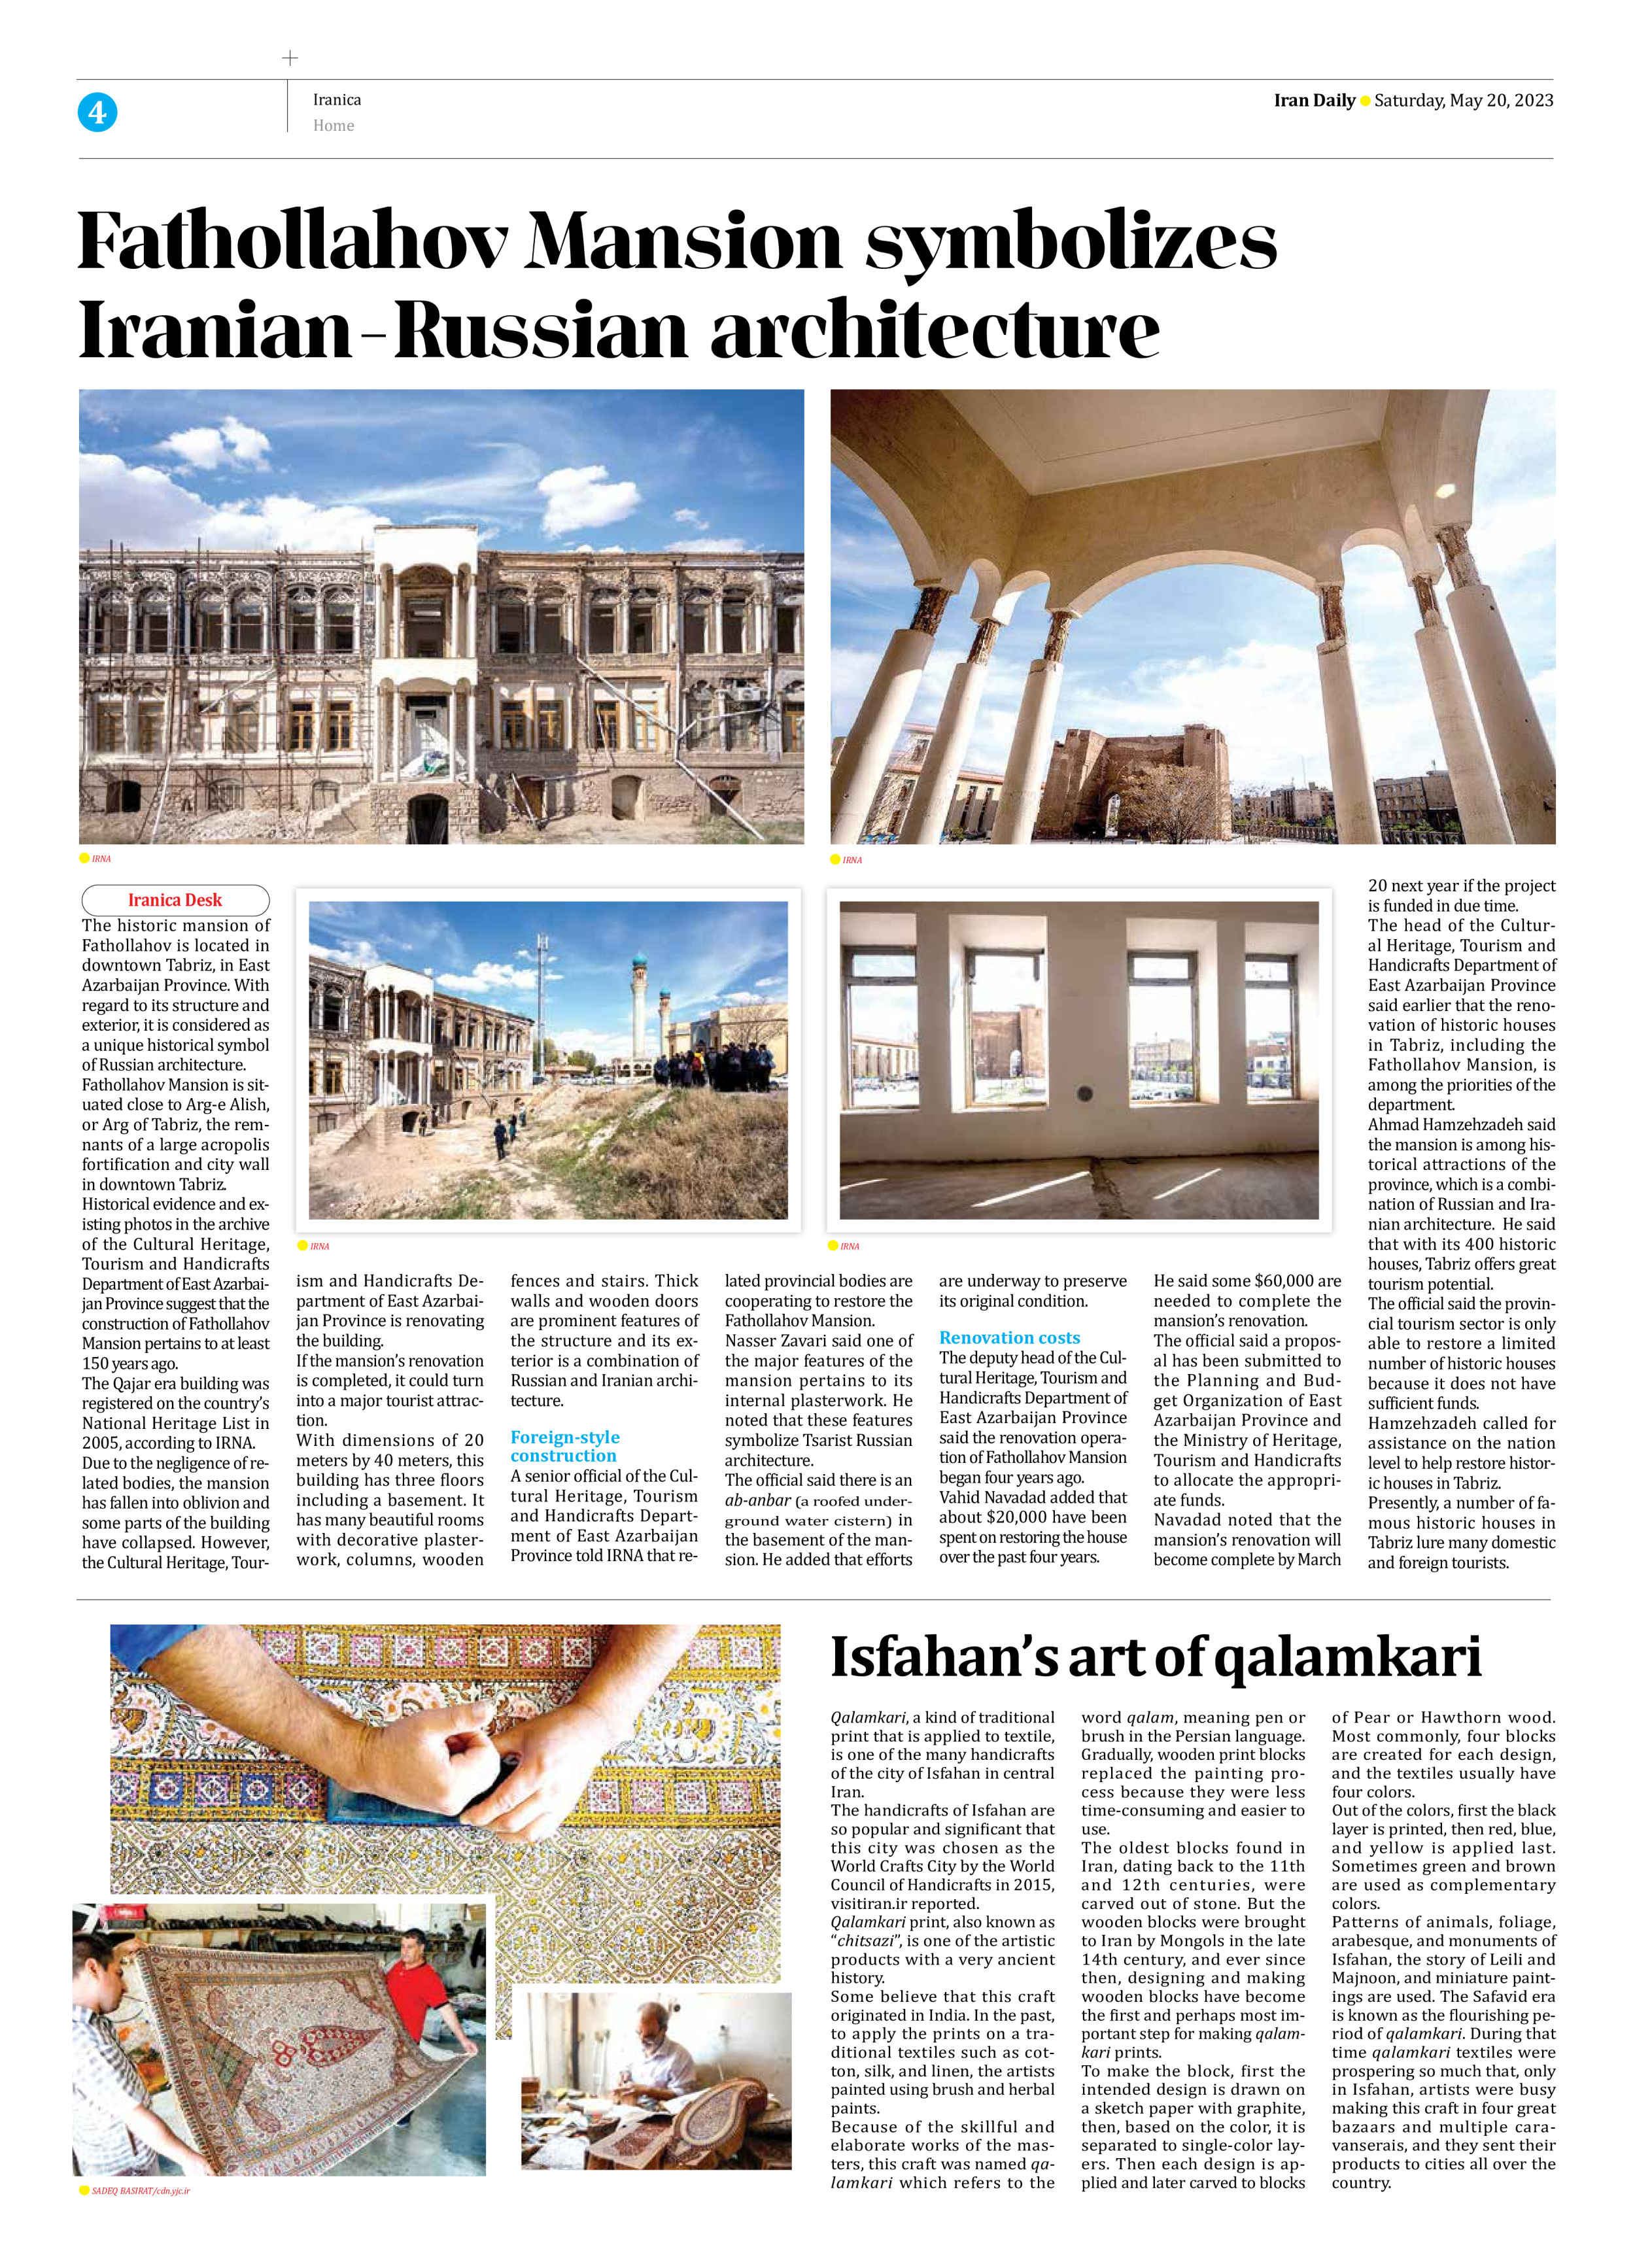 Iran Daily - Number Seven Thousand Two Hundred and Ninety Five - 20 May 2023 - Page 4